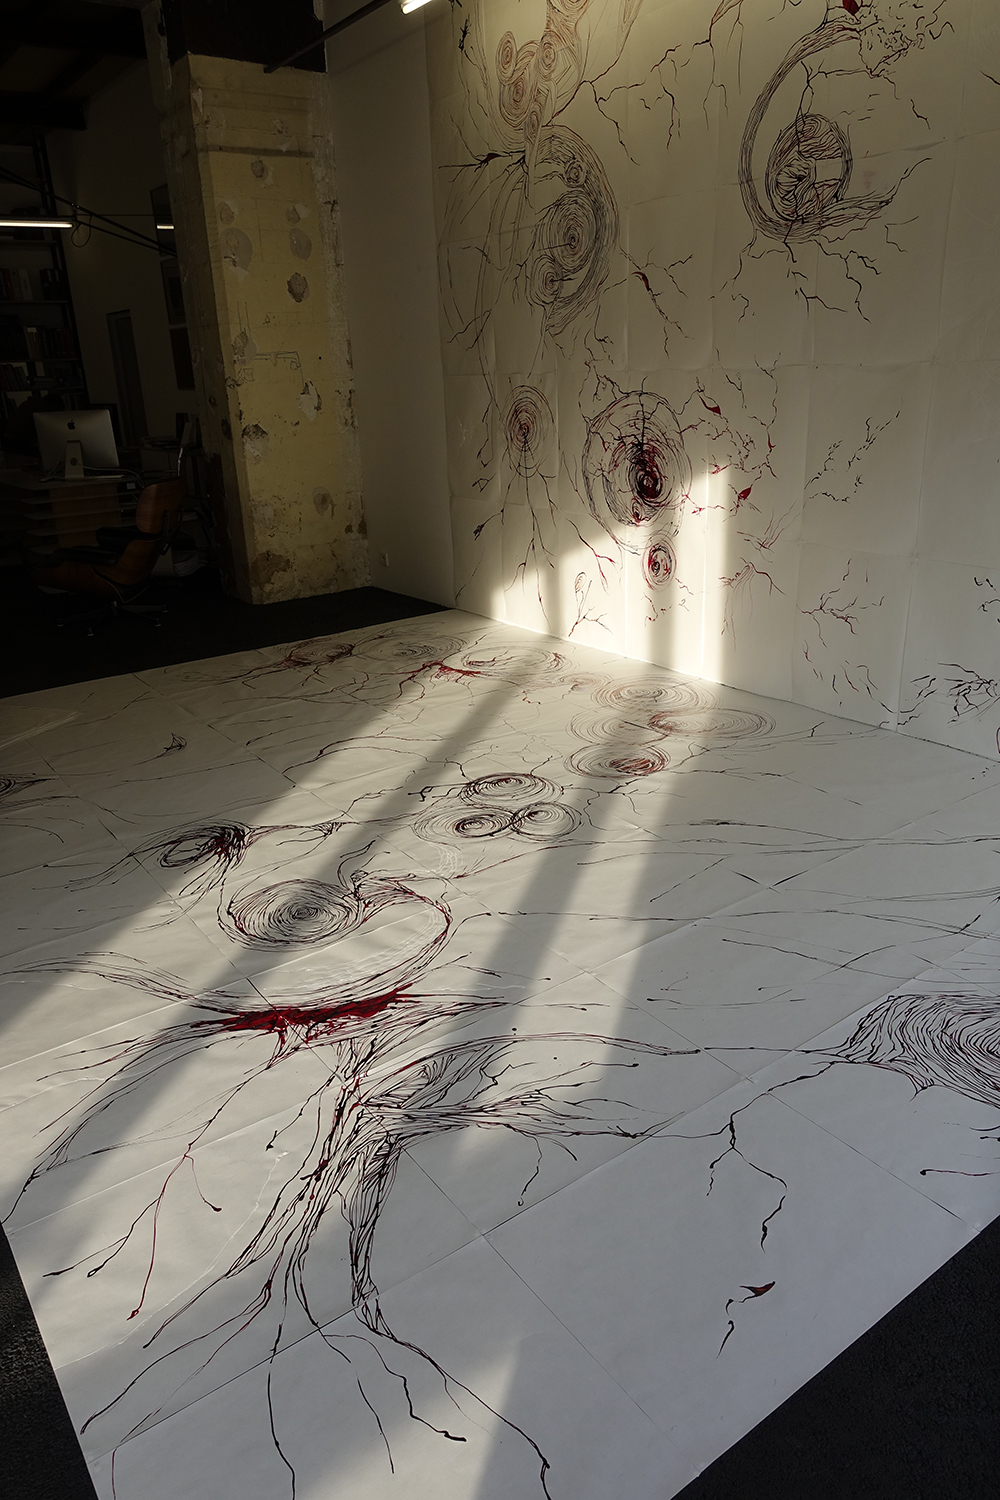 Seves brutes (Raw Saps) - present - Installation of part of the 180 pieces drawing